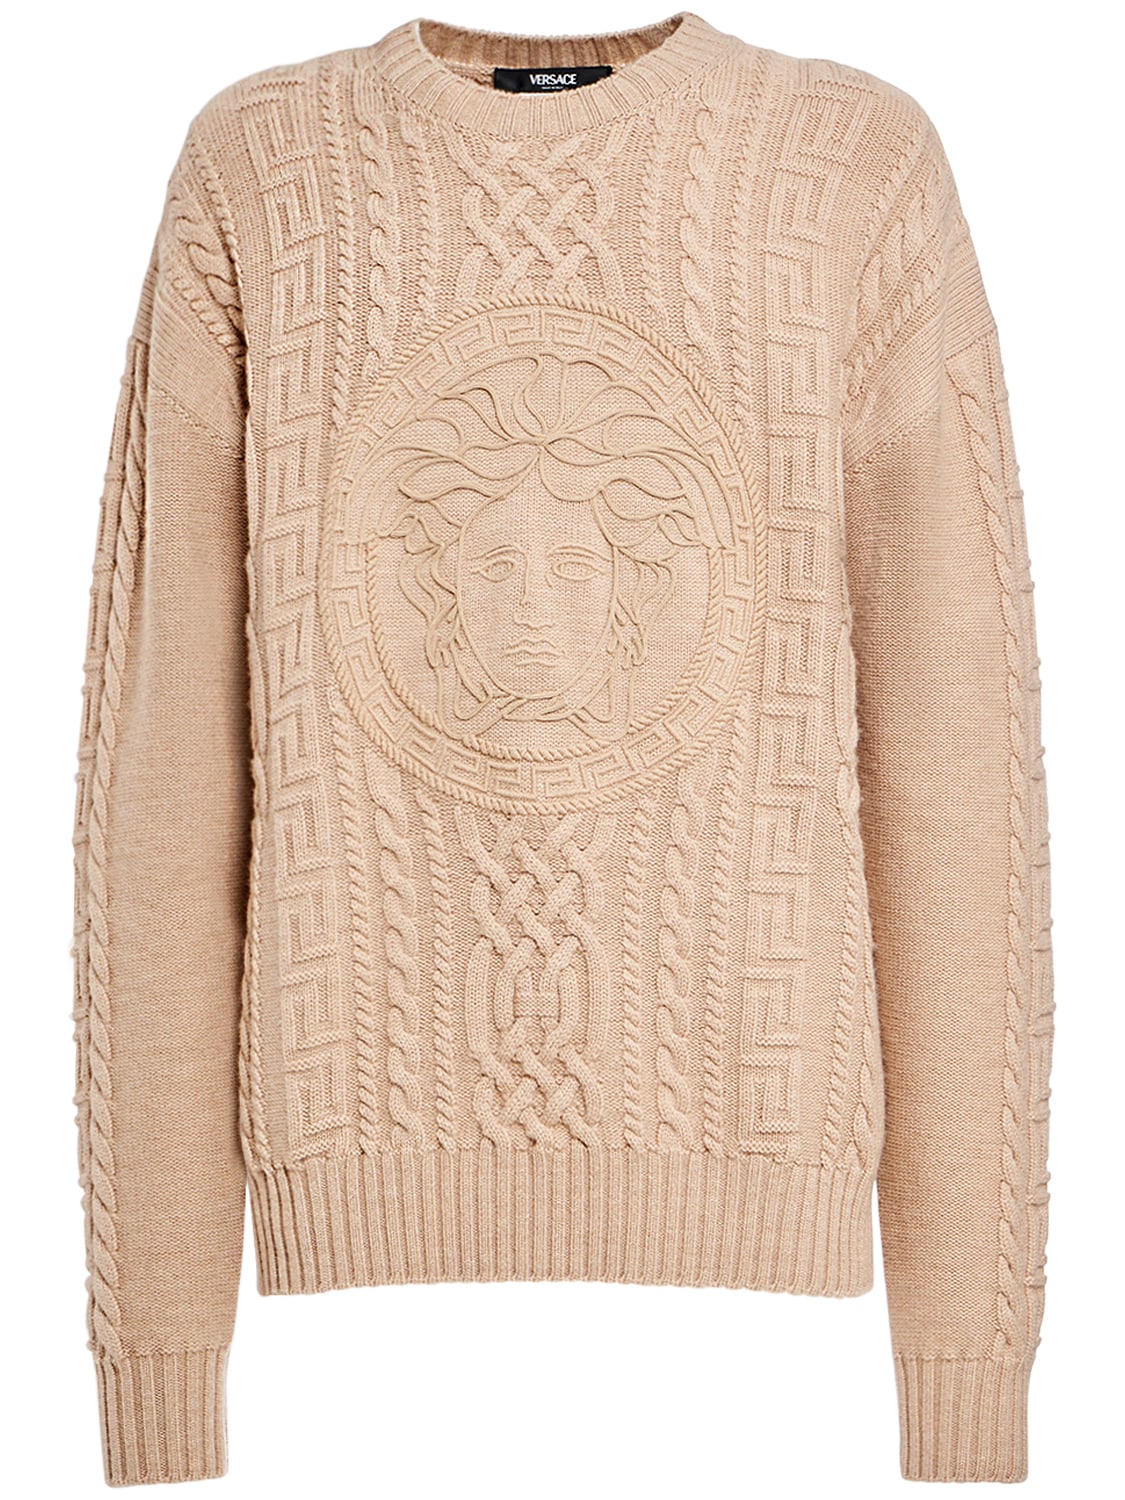 Medusa Embroidery Wool Knit Sweater